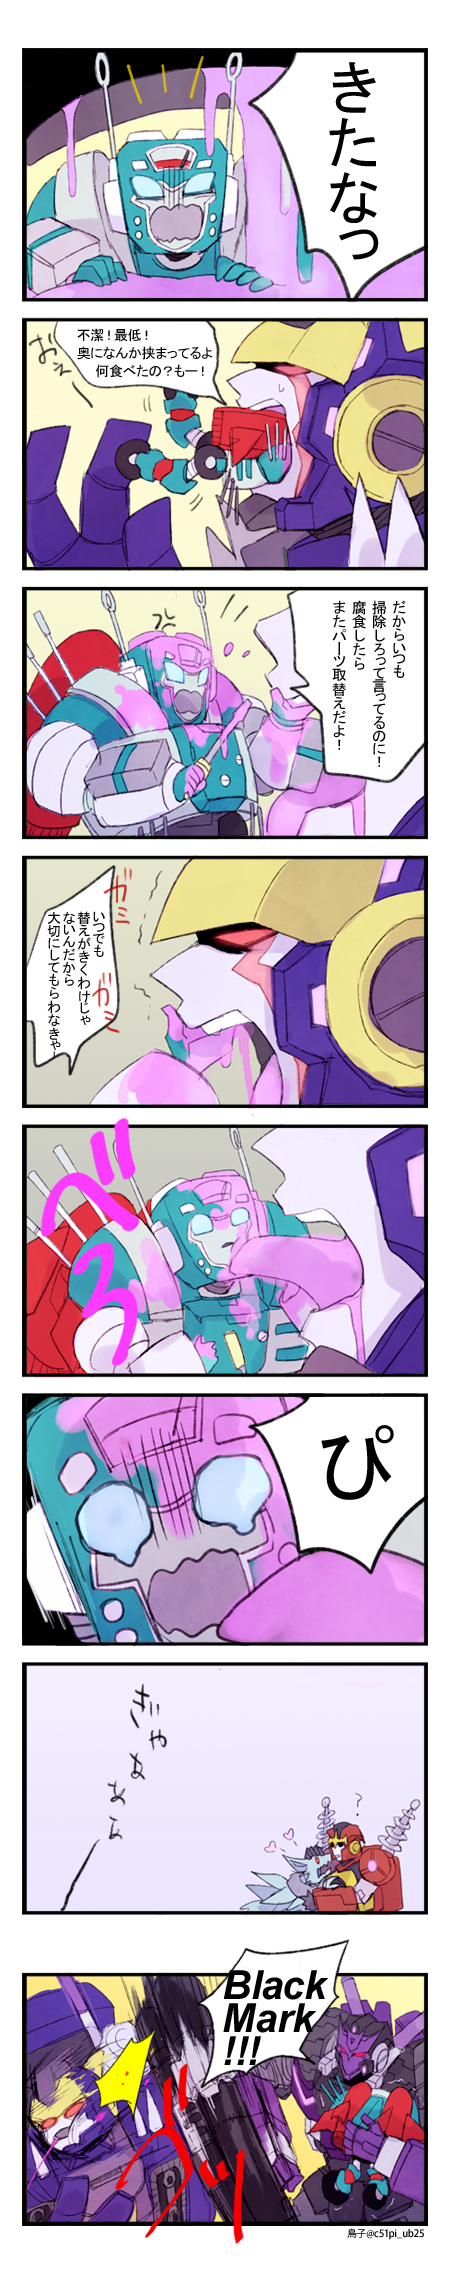 3boys 7koma arm_cannon artist_request autobot blue_eyes comic decepticon energon glowing glowing_eyes helex highres long_image machinery mask multiple_boys nickel no_humans open_mouth punching purple_eyes red_eyes tall_image tarn teeth transformers translation_request weapon